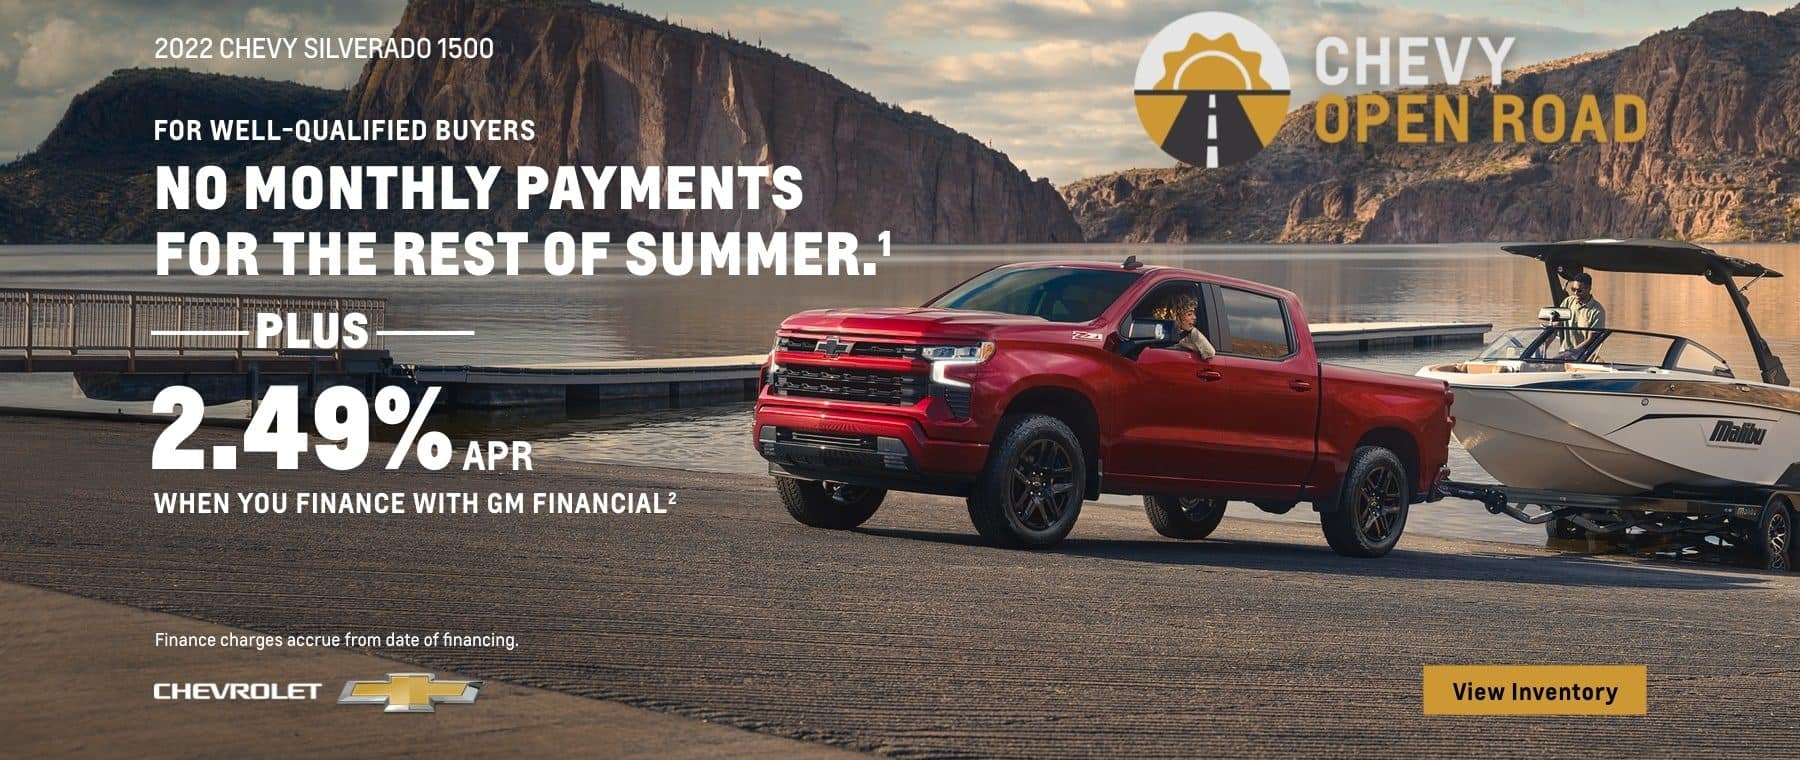 2022 Chevy Silverado 1500. Chevy Open Road. For well-qualified buyers. No monthly payments for the rest of summer. Plus, 2.49% APR when you finance with GM Financial. Finance charges accrue from date of financing.